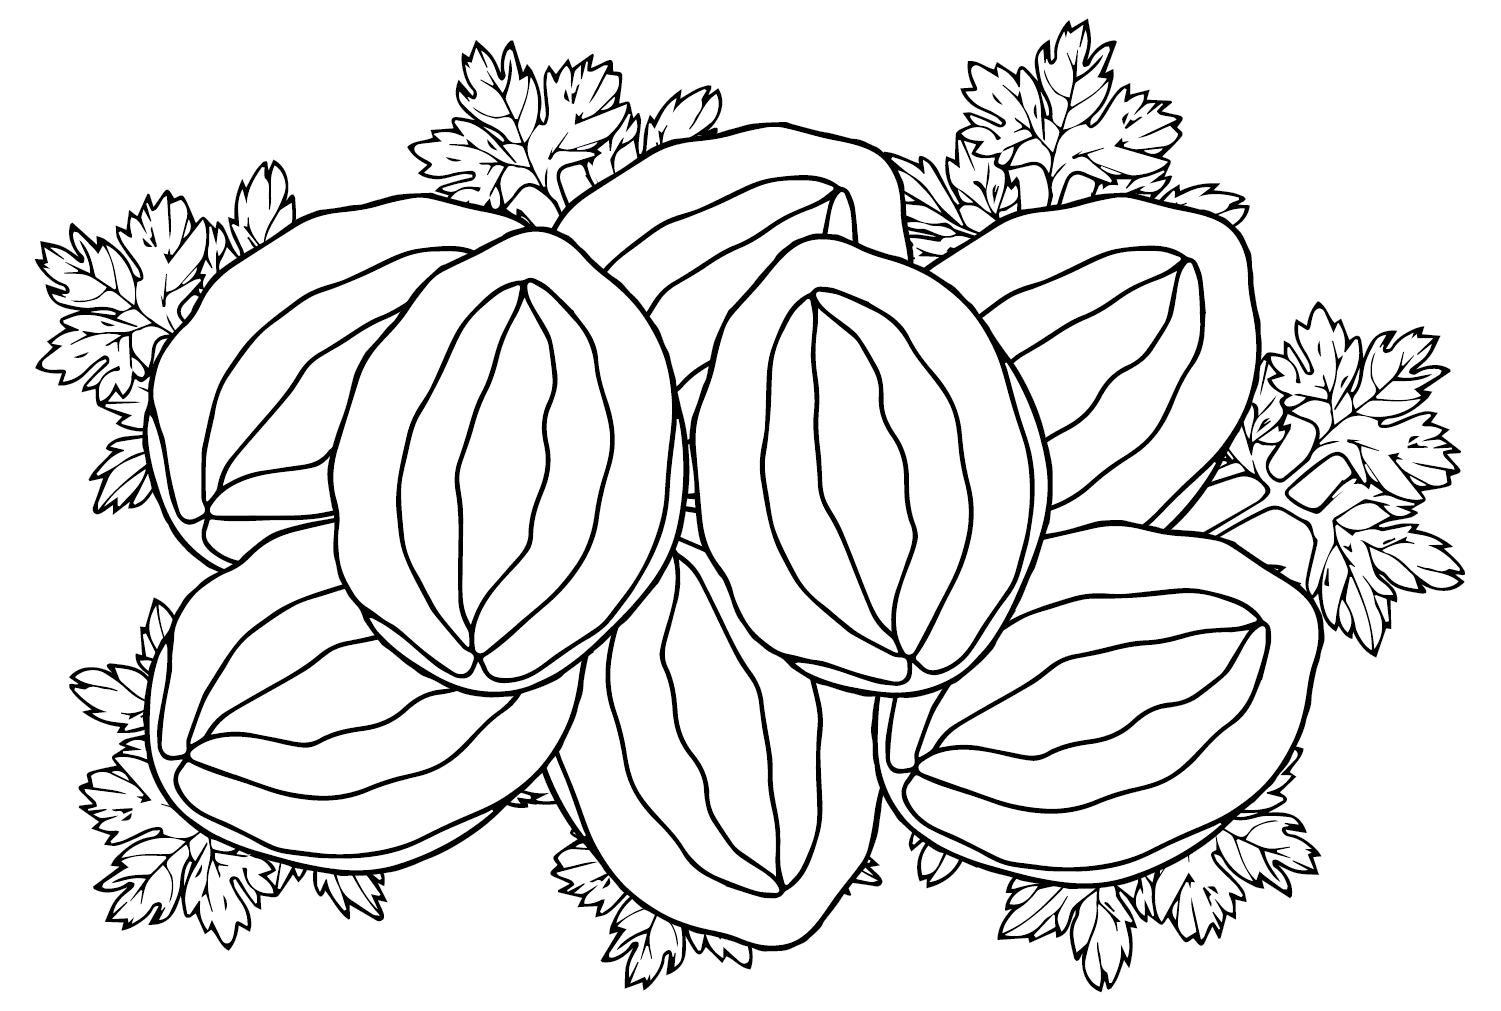 Print Abalone Coloring Page from Abalone